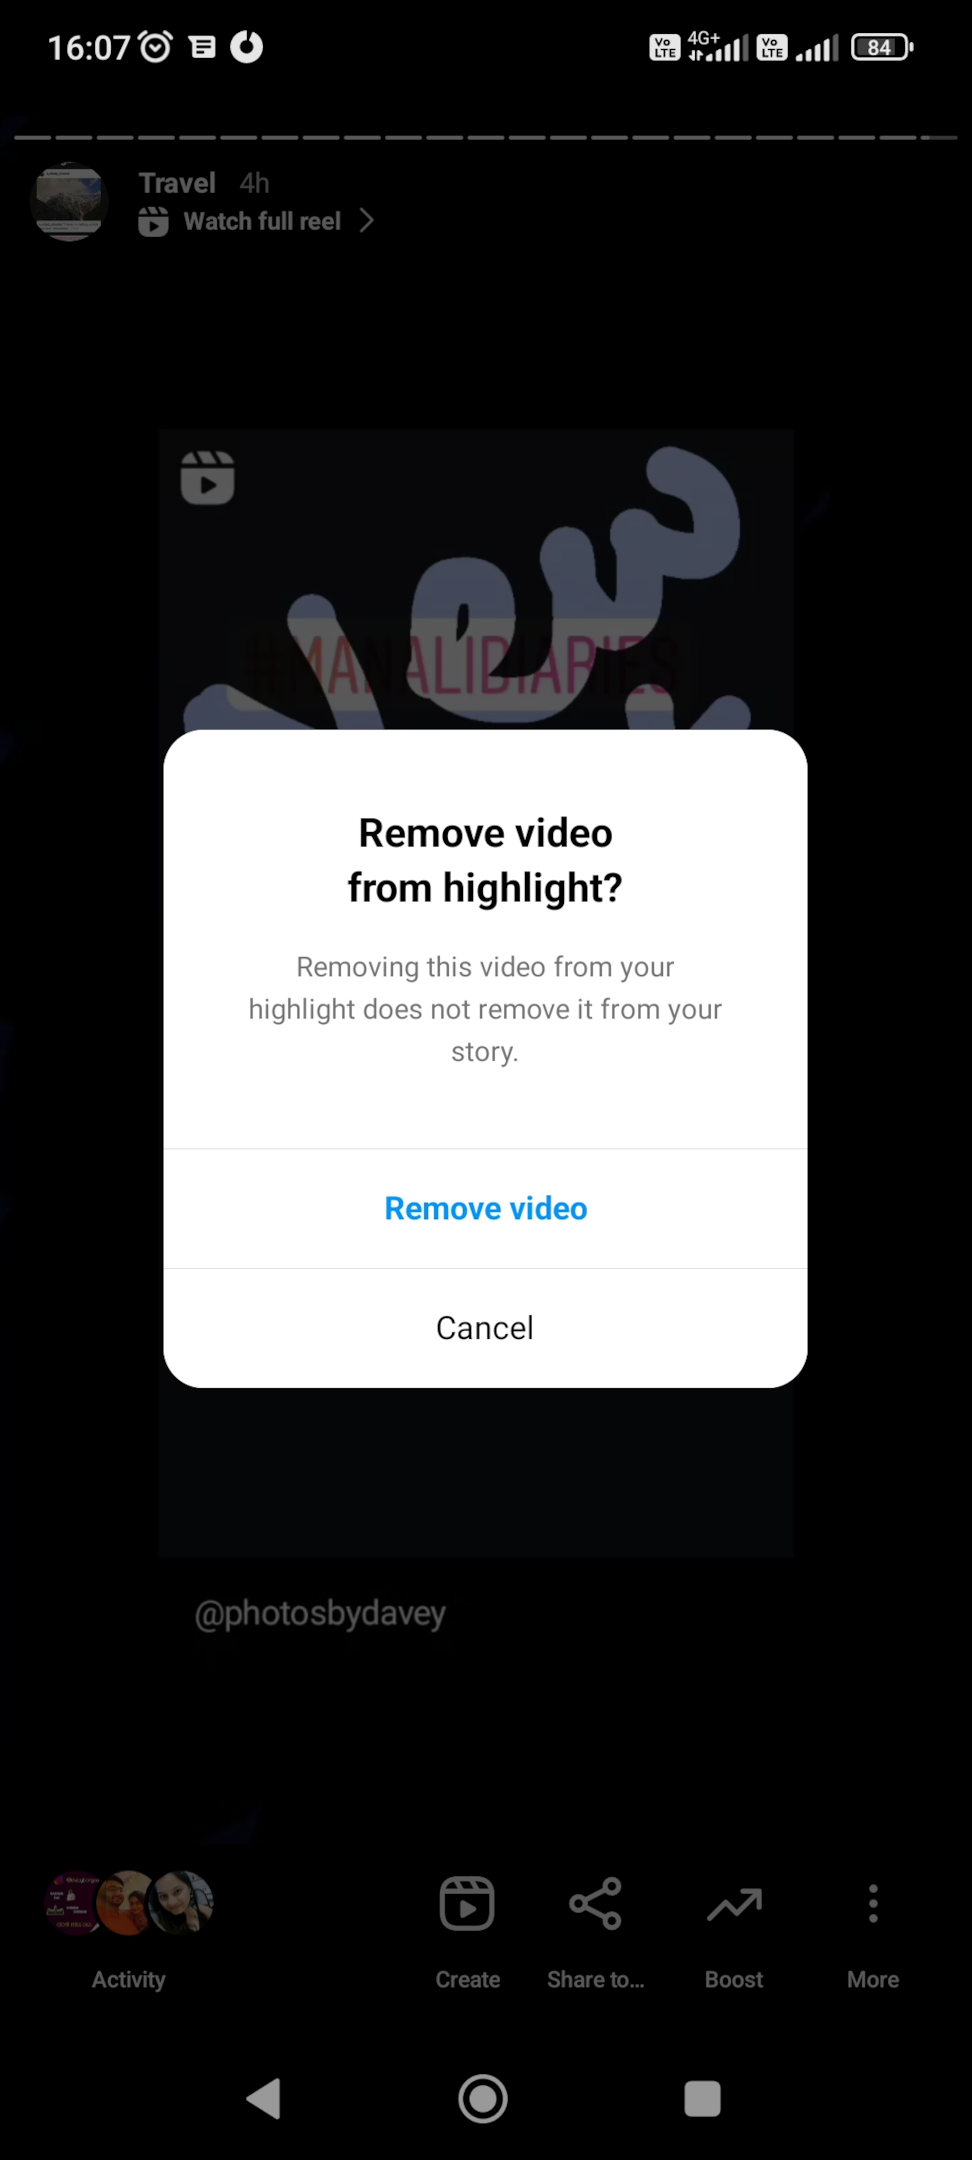 Remote.tools shows how to confirm removing an story from Instagram highlights